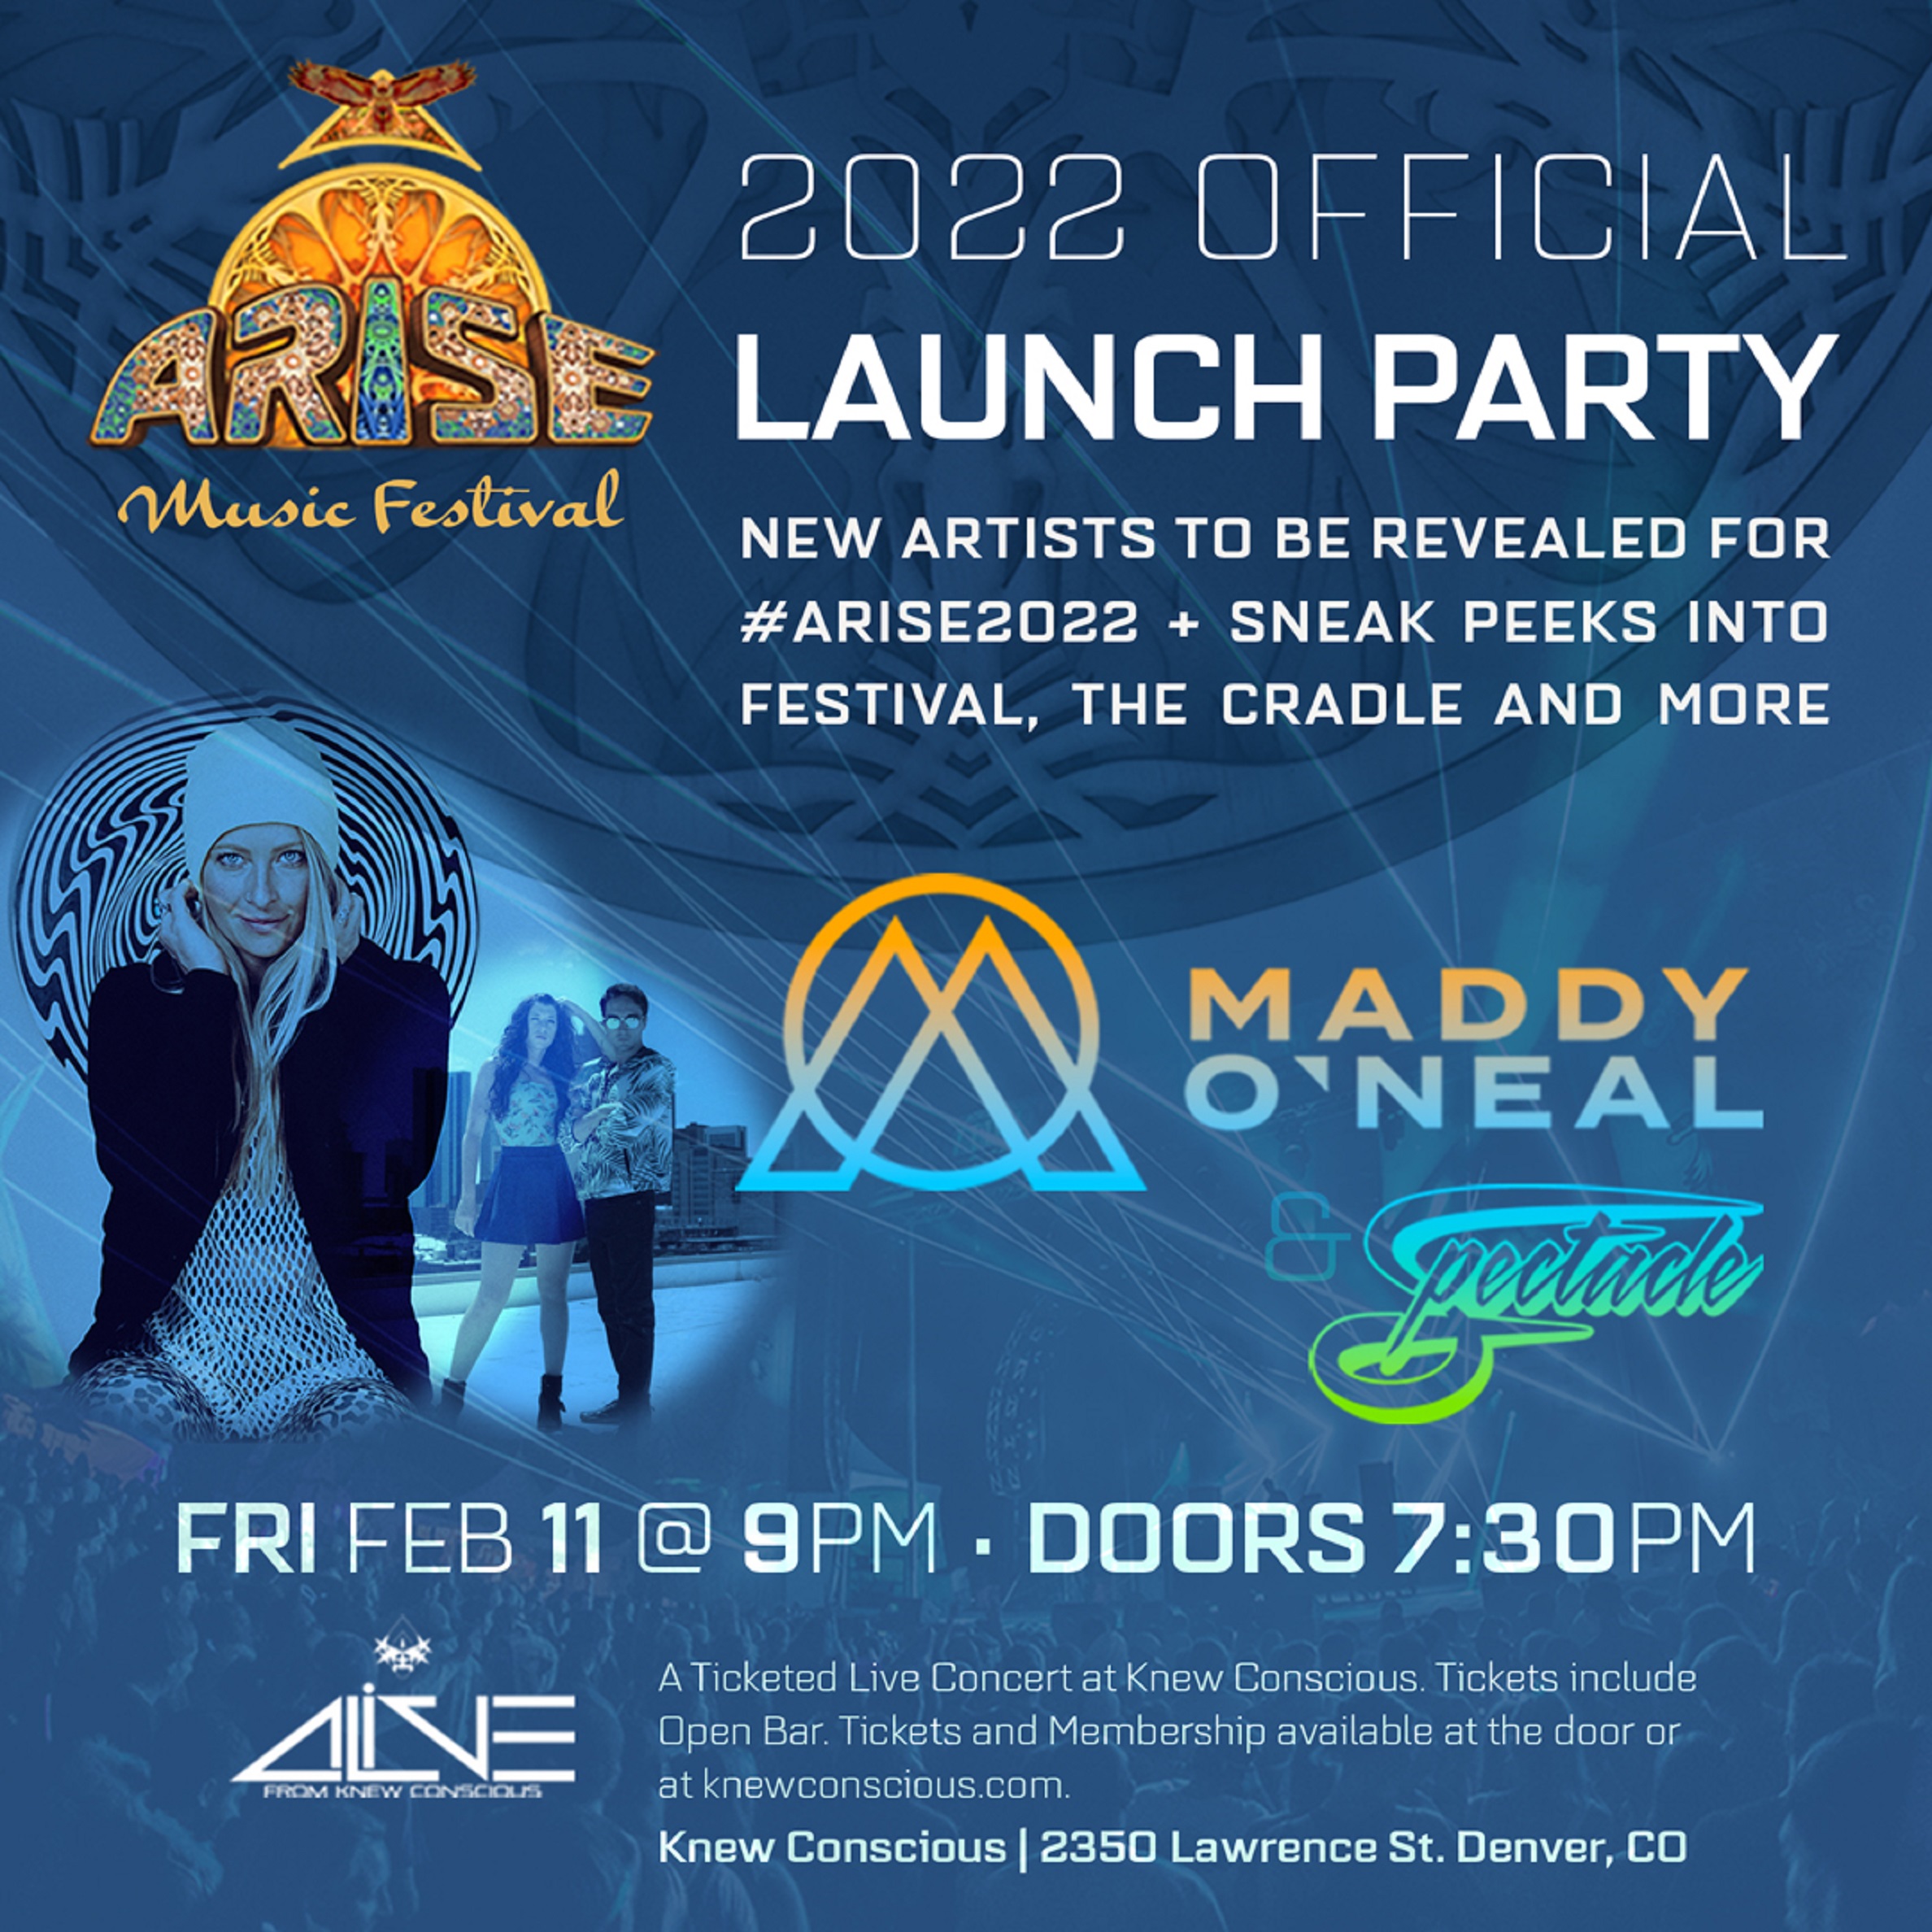 ARISE Music Festival 2022 Official Launch Party takes place February 11